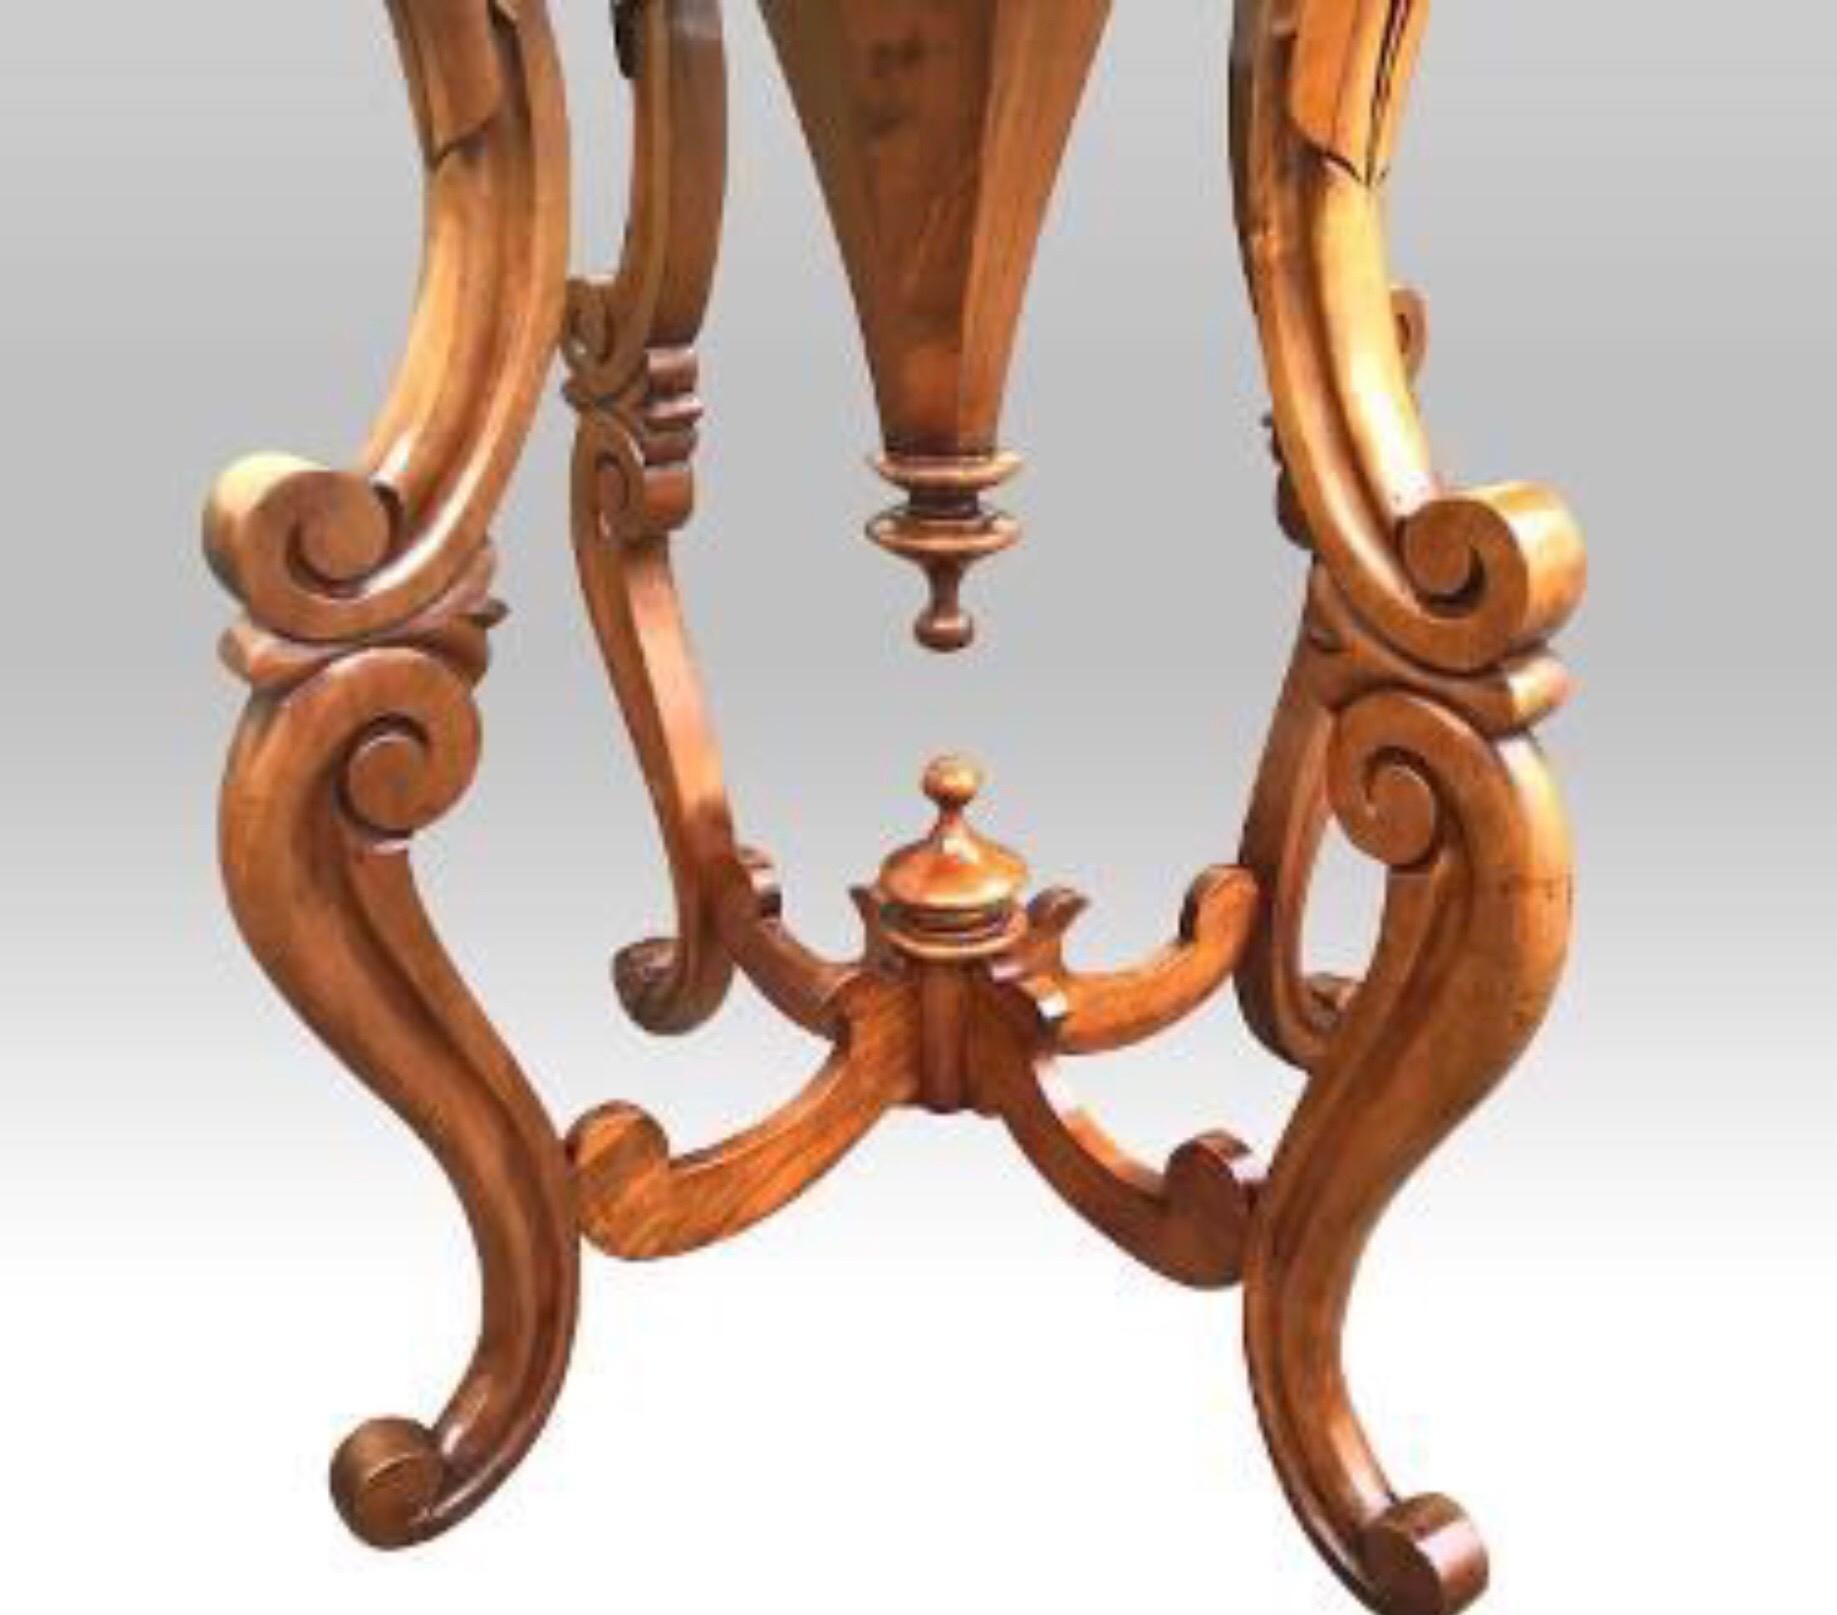 Superb Victorian burr walnut antique cradled trumpet sewing table with tear drop finials and lovely fitted interior.
Working lock and key.
c1870 

Measures: 18ins x 27ins high
46cm x 69cm high

Weekly deliveries to all of Great Britian and